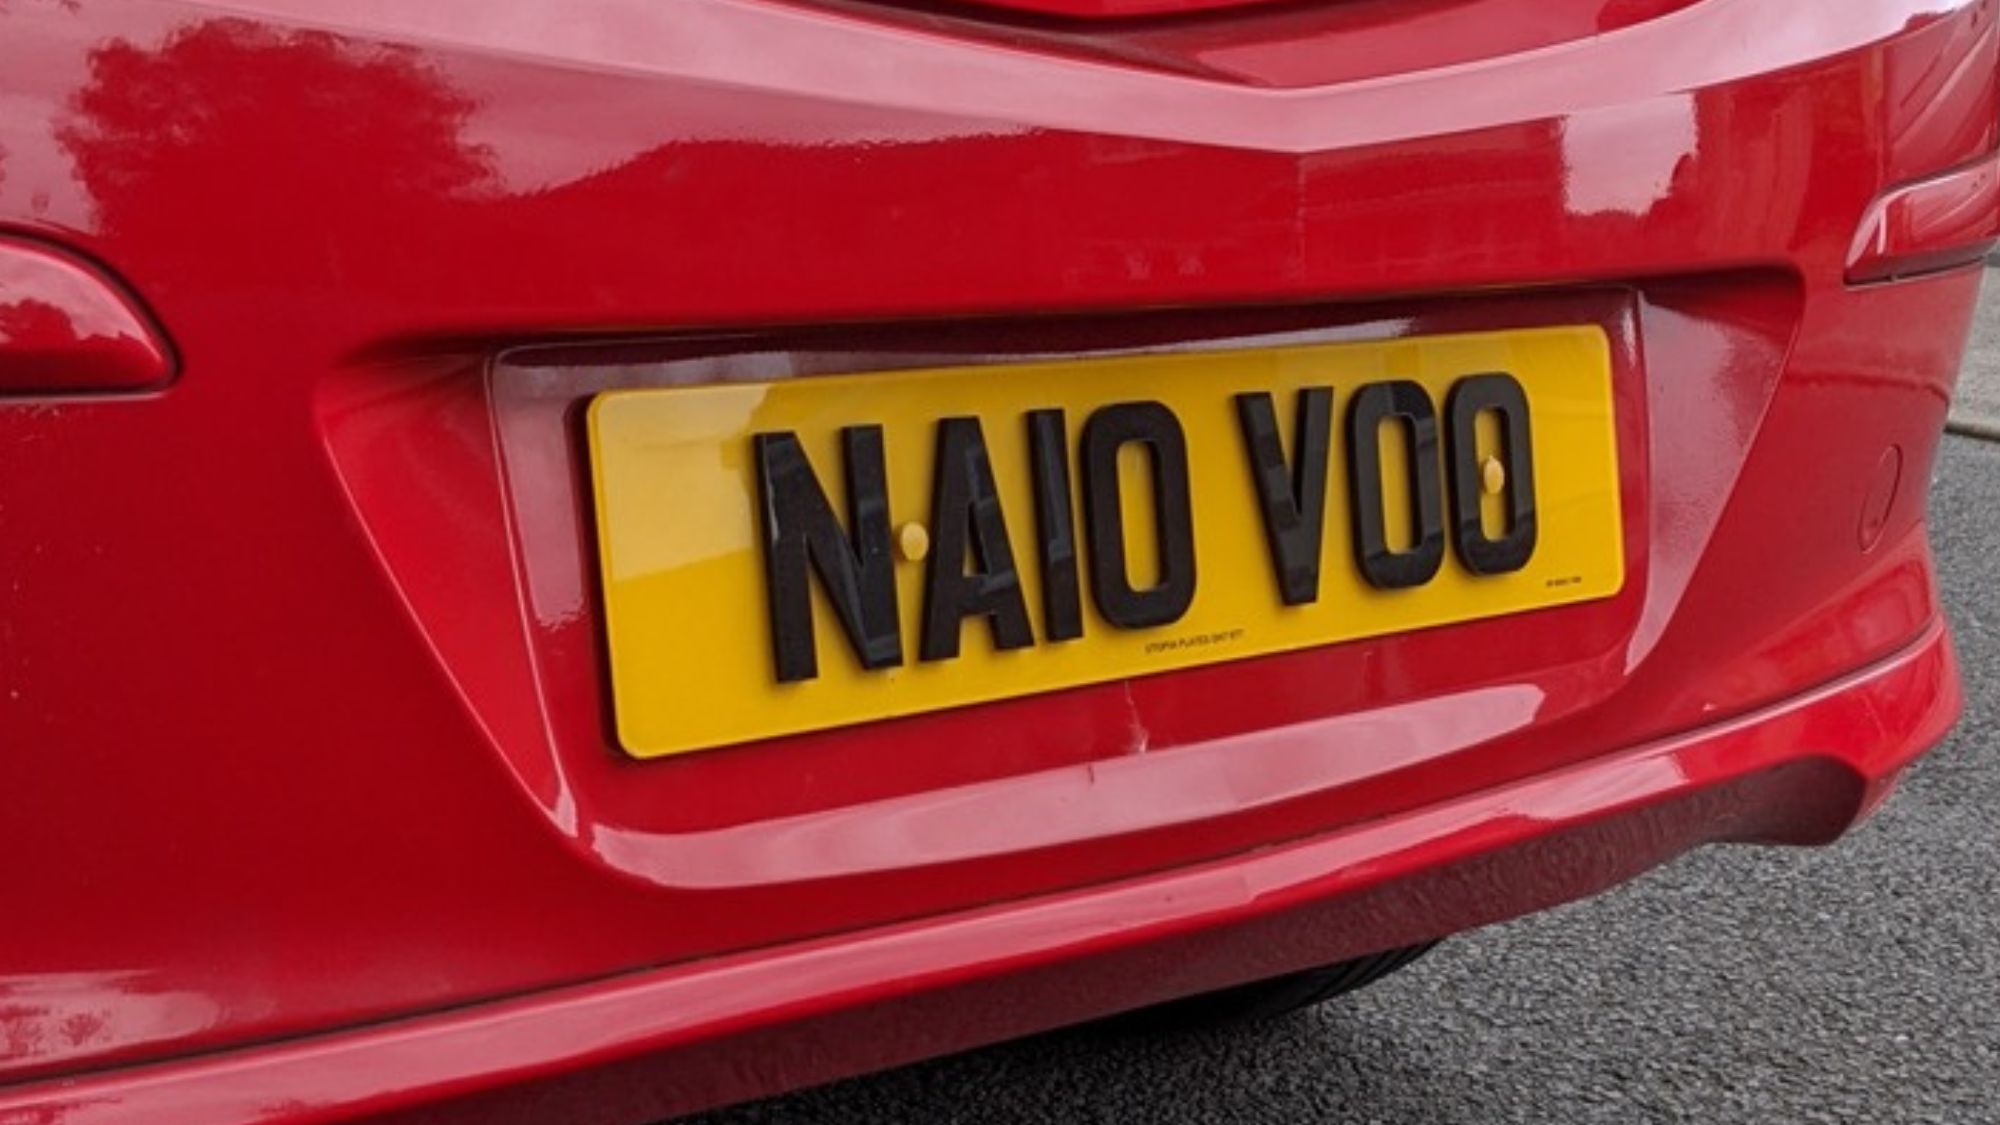 A red car with 4d license plates help to improve vehicle identification